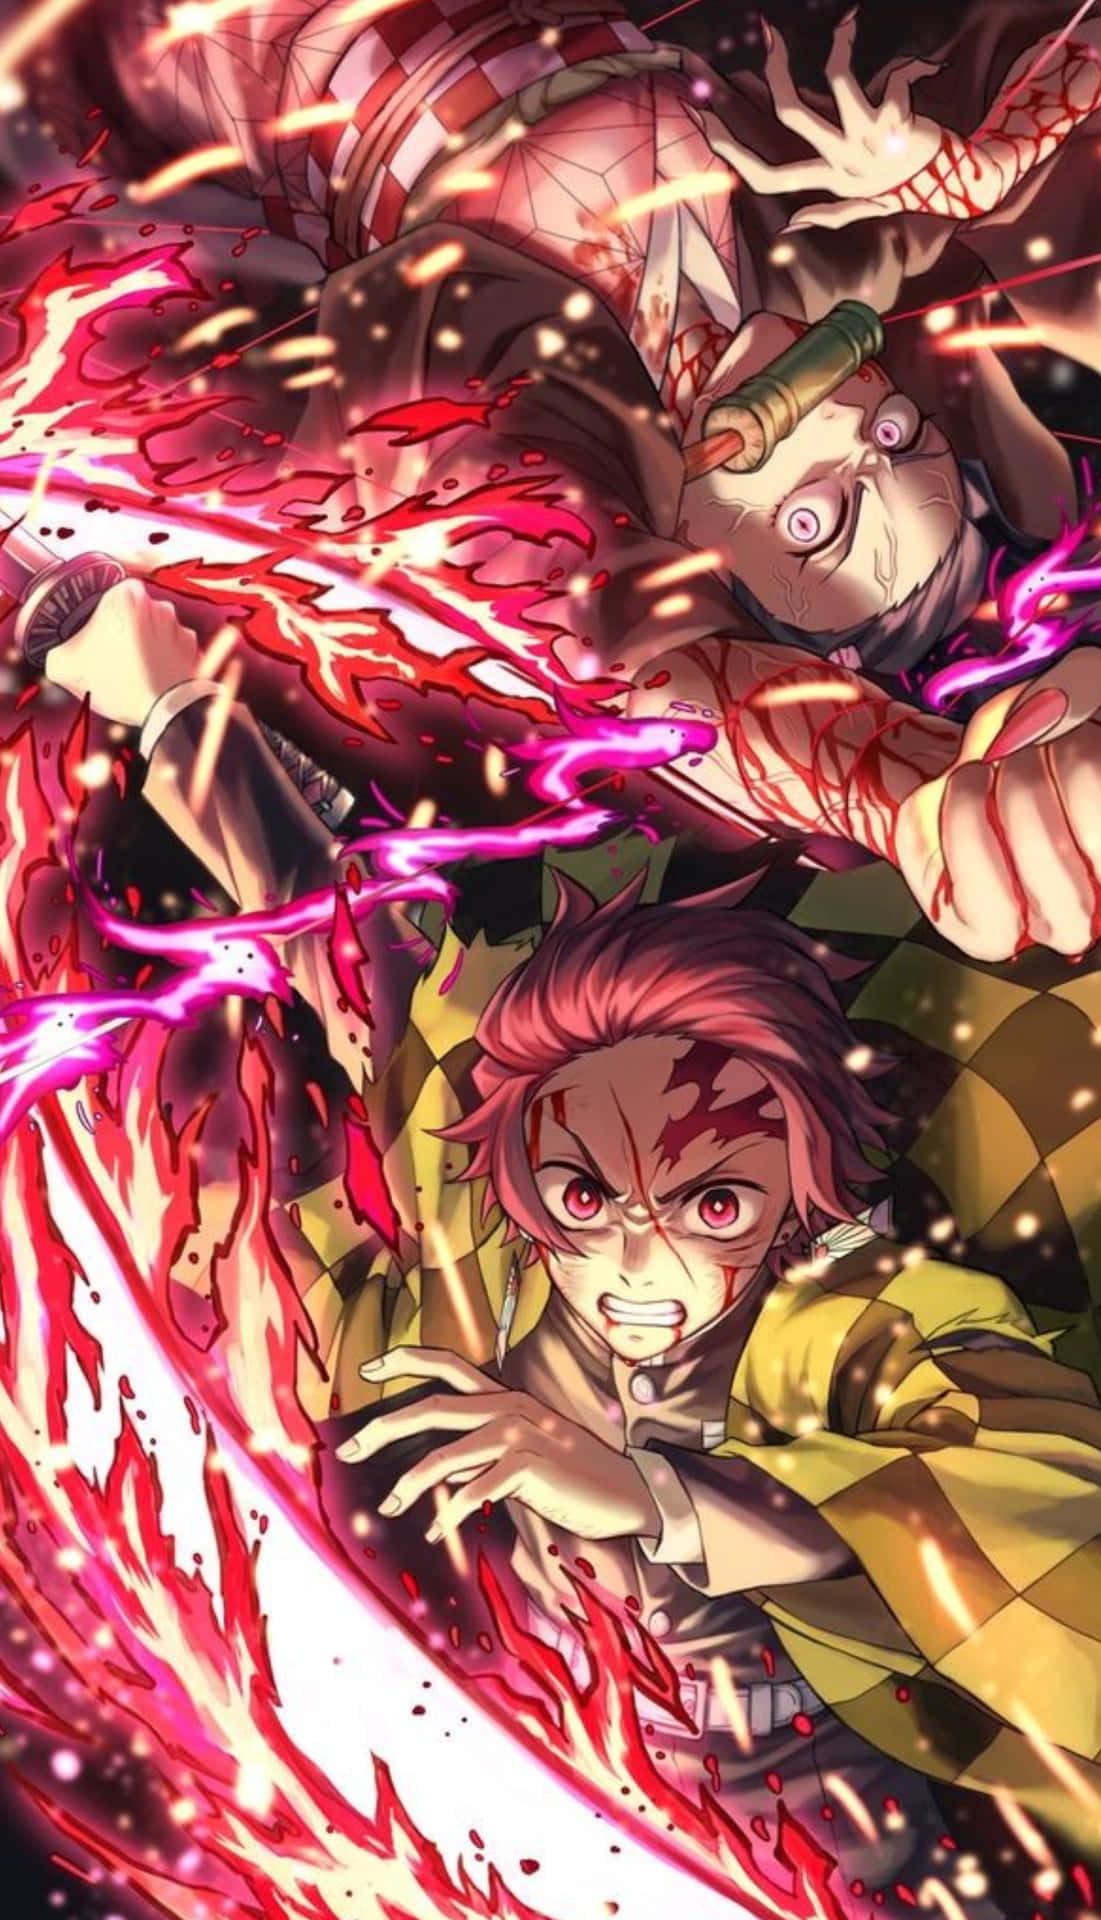 "Unlock the Power of Demon Slayer With the Iphone 11" Wallpaper